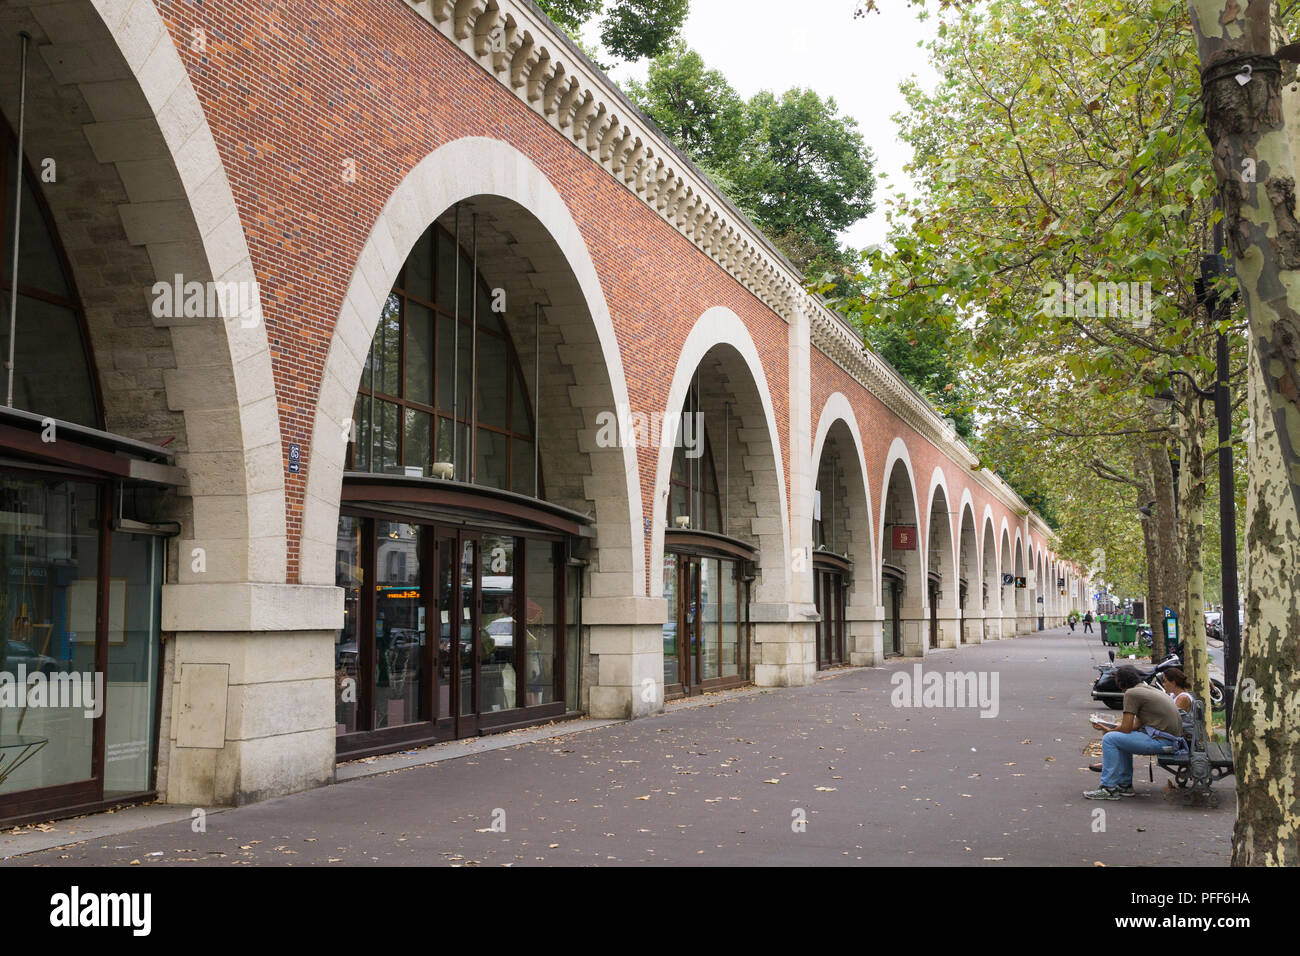 Le Viaduc des Arts on Avenue Daumesnil in Paris, a former railway line viaduct today housing art galleries and the Promenade Plantee park on its top. Stock Photo